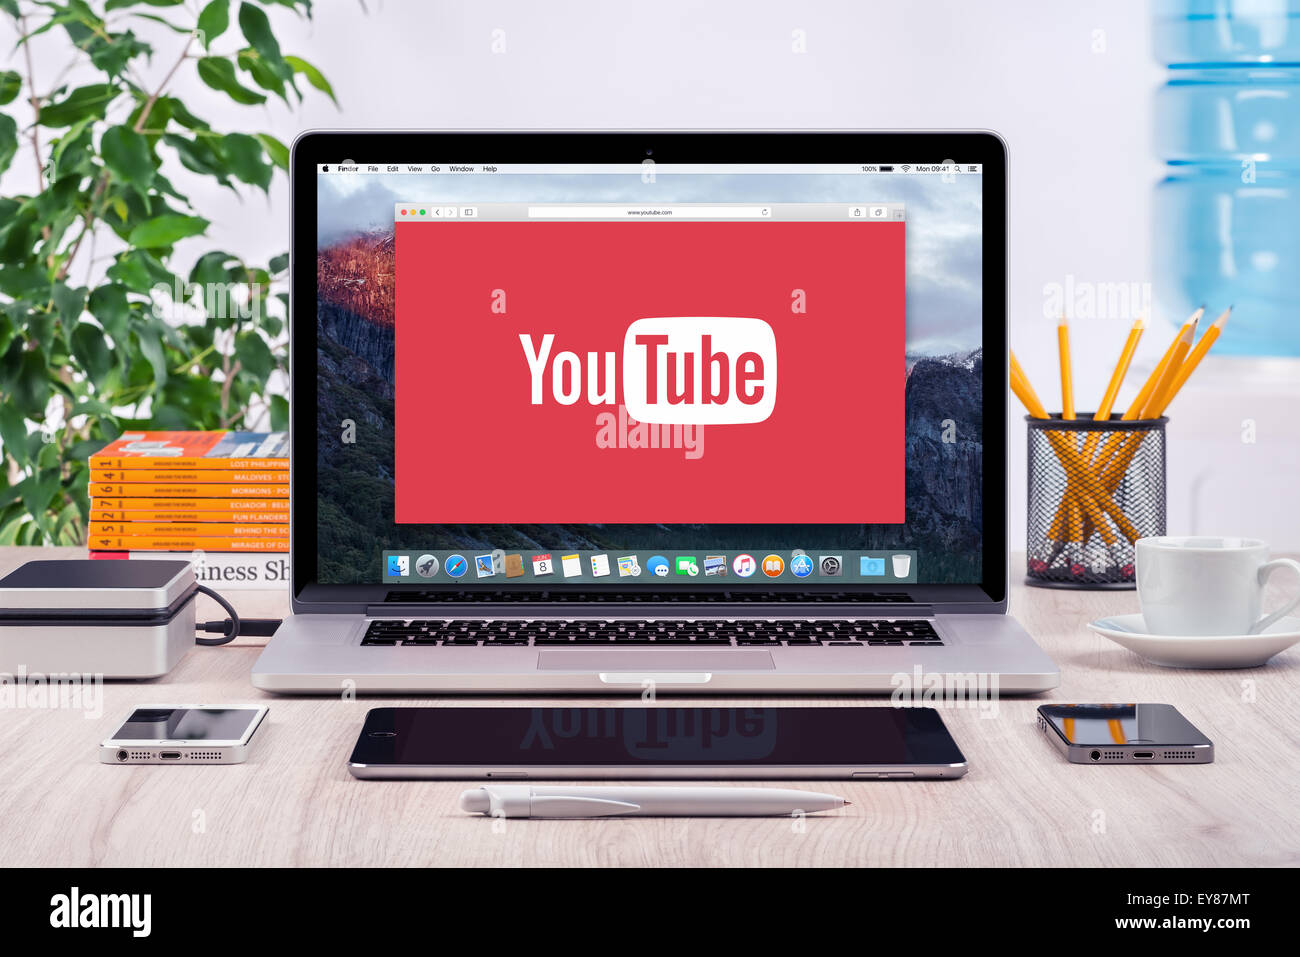 Varna, Bulgaria - May 31, 2015: YouTube logo on the front view Apple MacBook Pro screen. YouTube presentation concept. Stock Photo